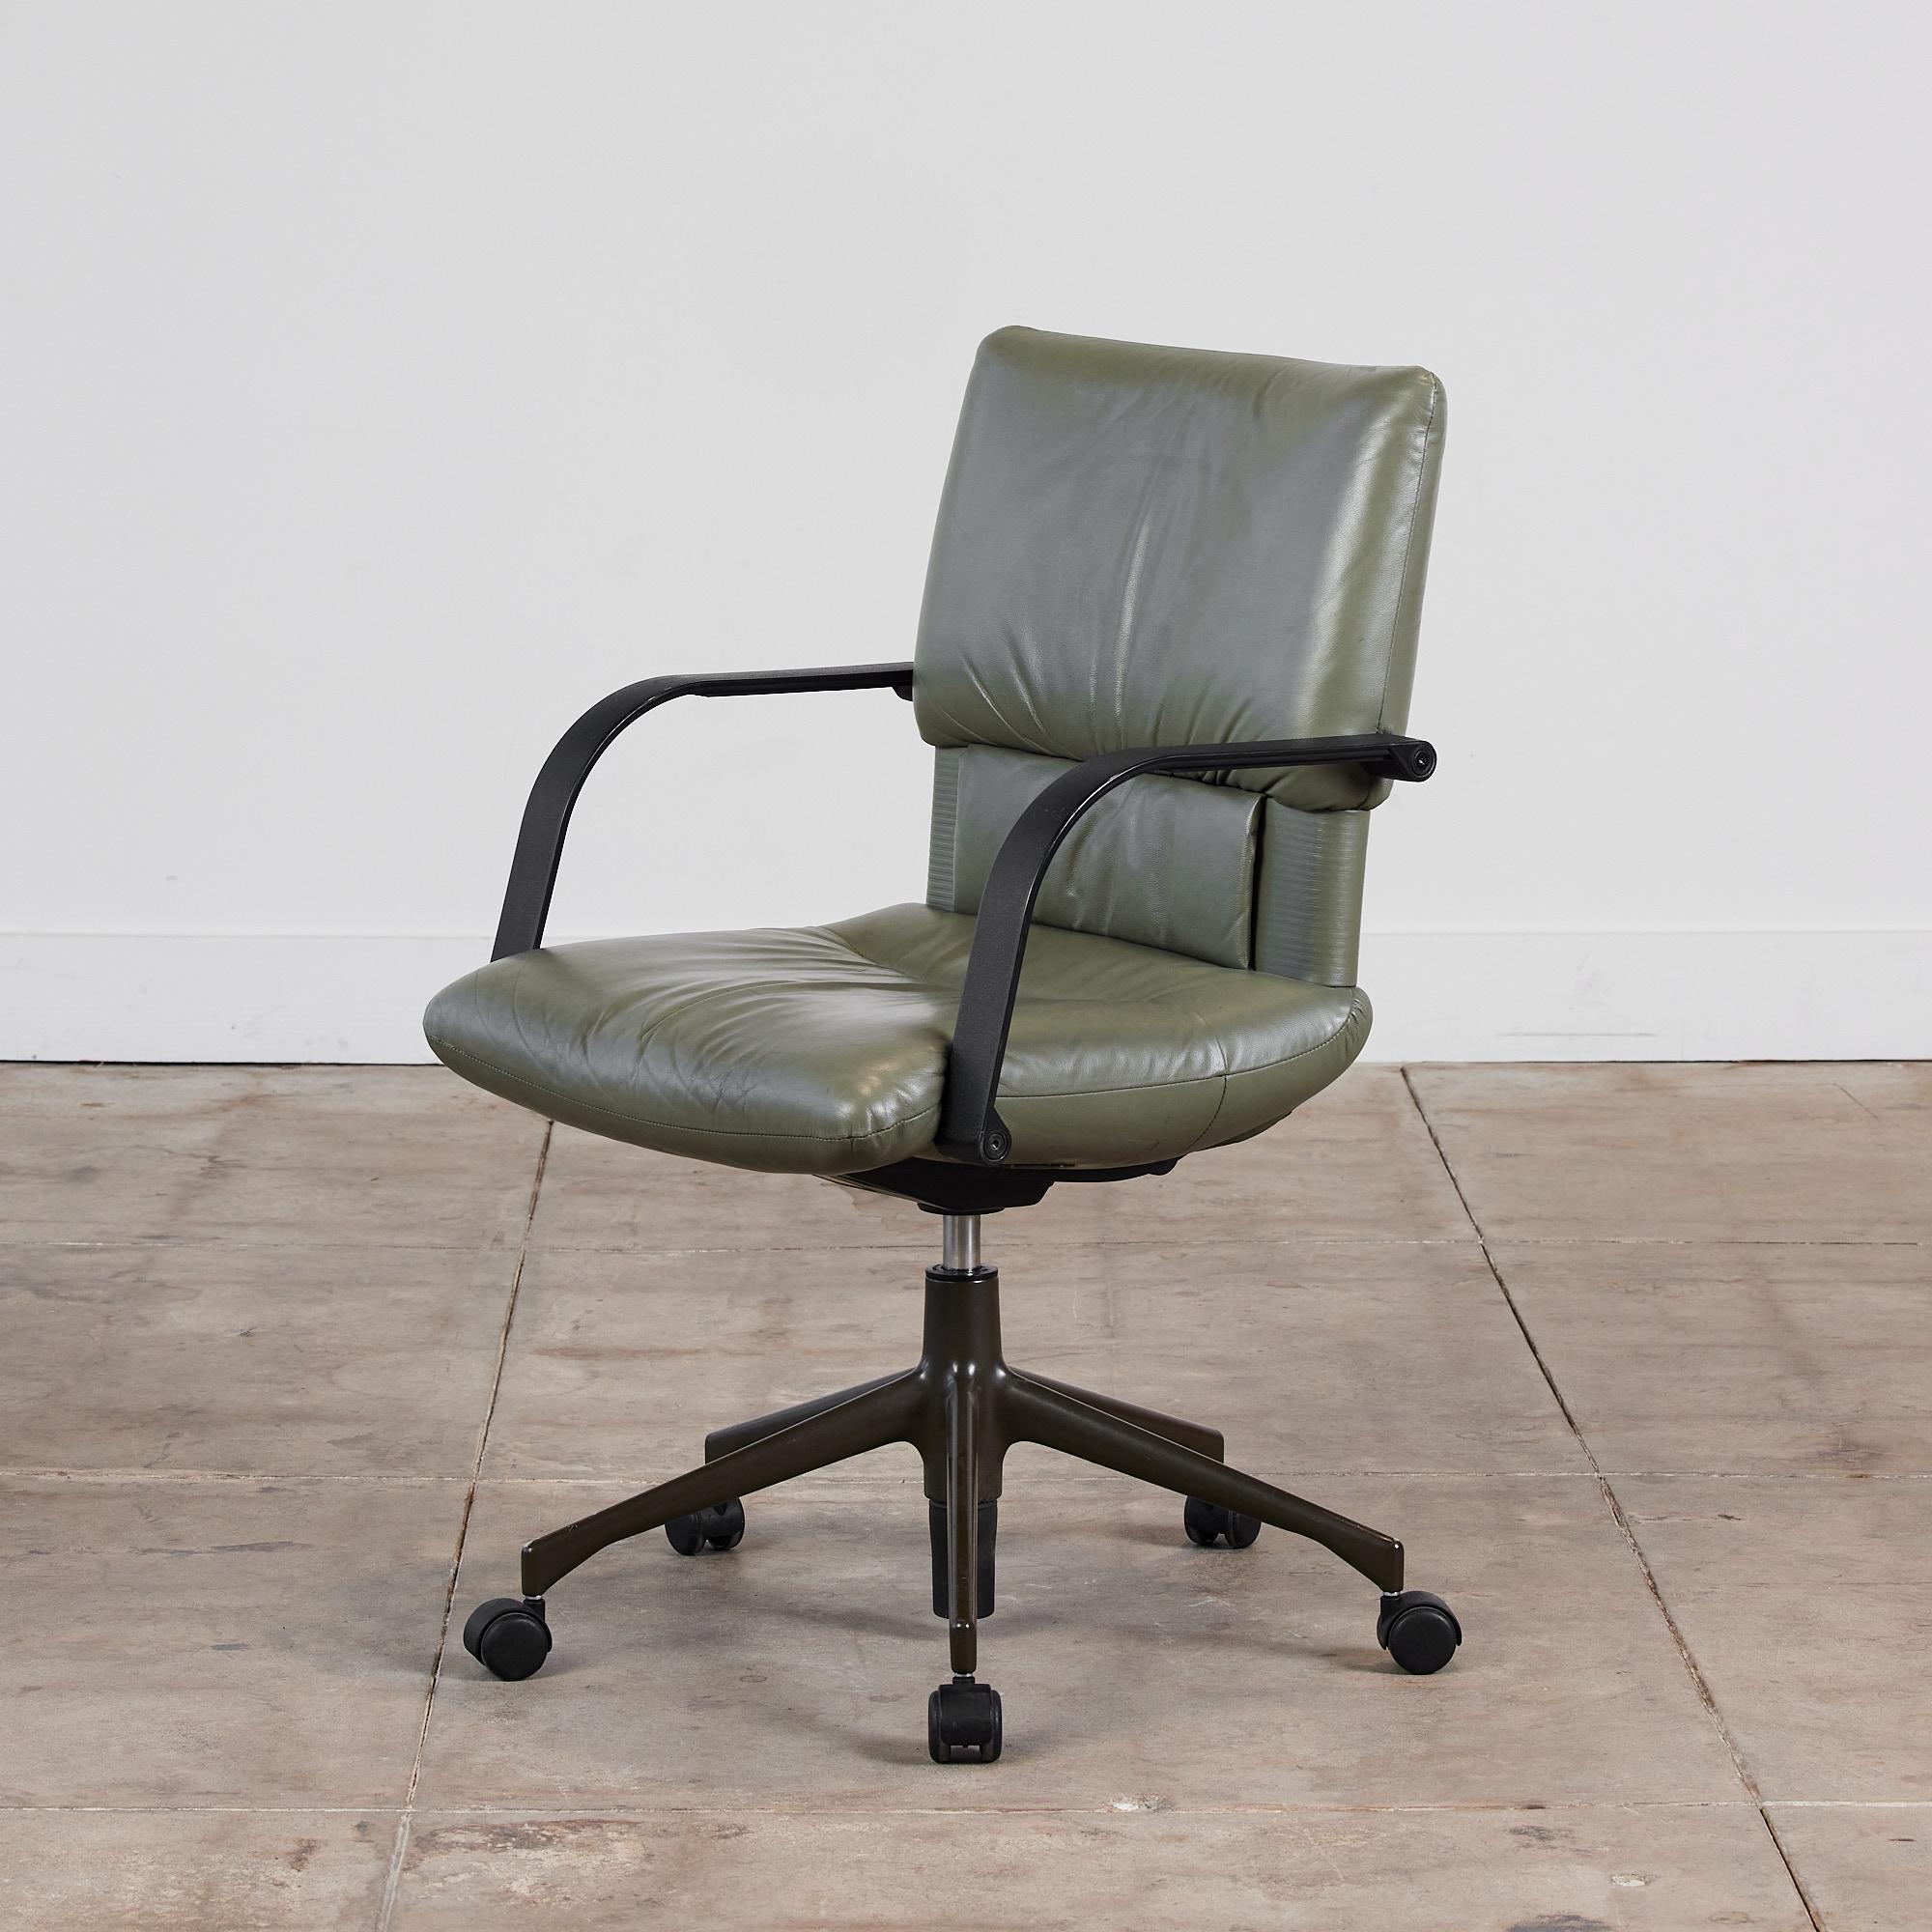 Office chair by Mario Bellini for Vitra, c.1998. The armchair features a gathered olive green gray leather seat and backrest with cushioned lumbar support. There is a push bottom on the bottom of the seat which allows the chair to recline in